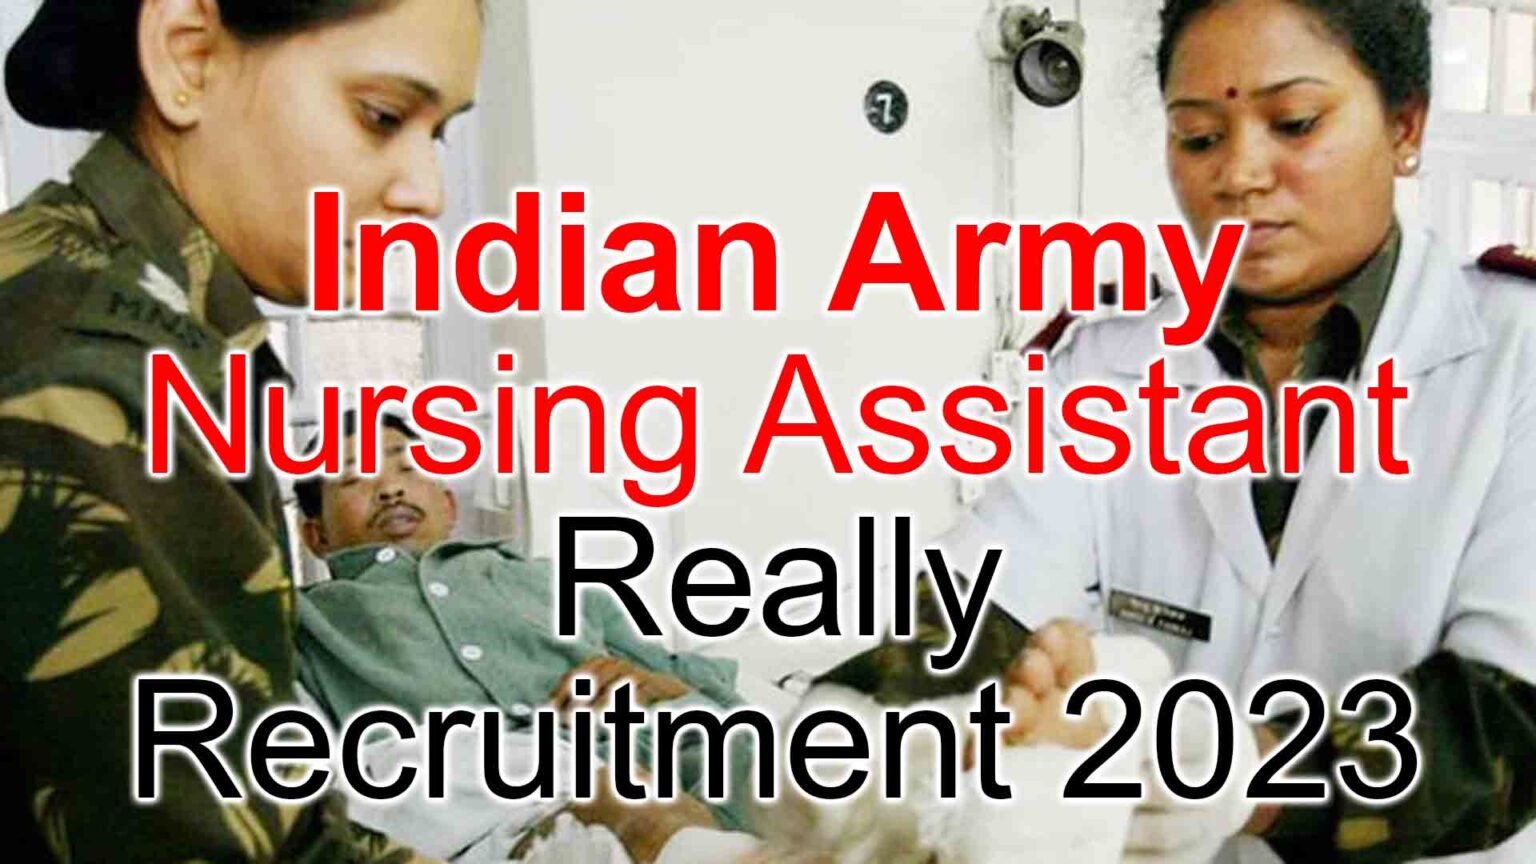 Indian Army Nursing Assistant Recruitment 2023 Last Date Extended